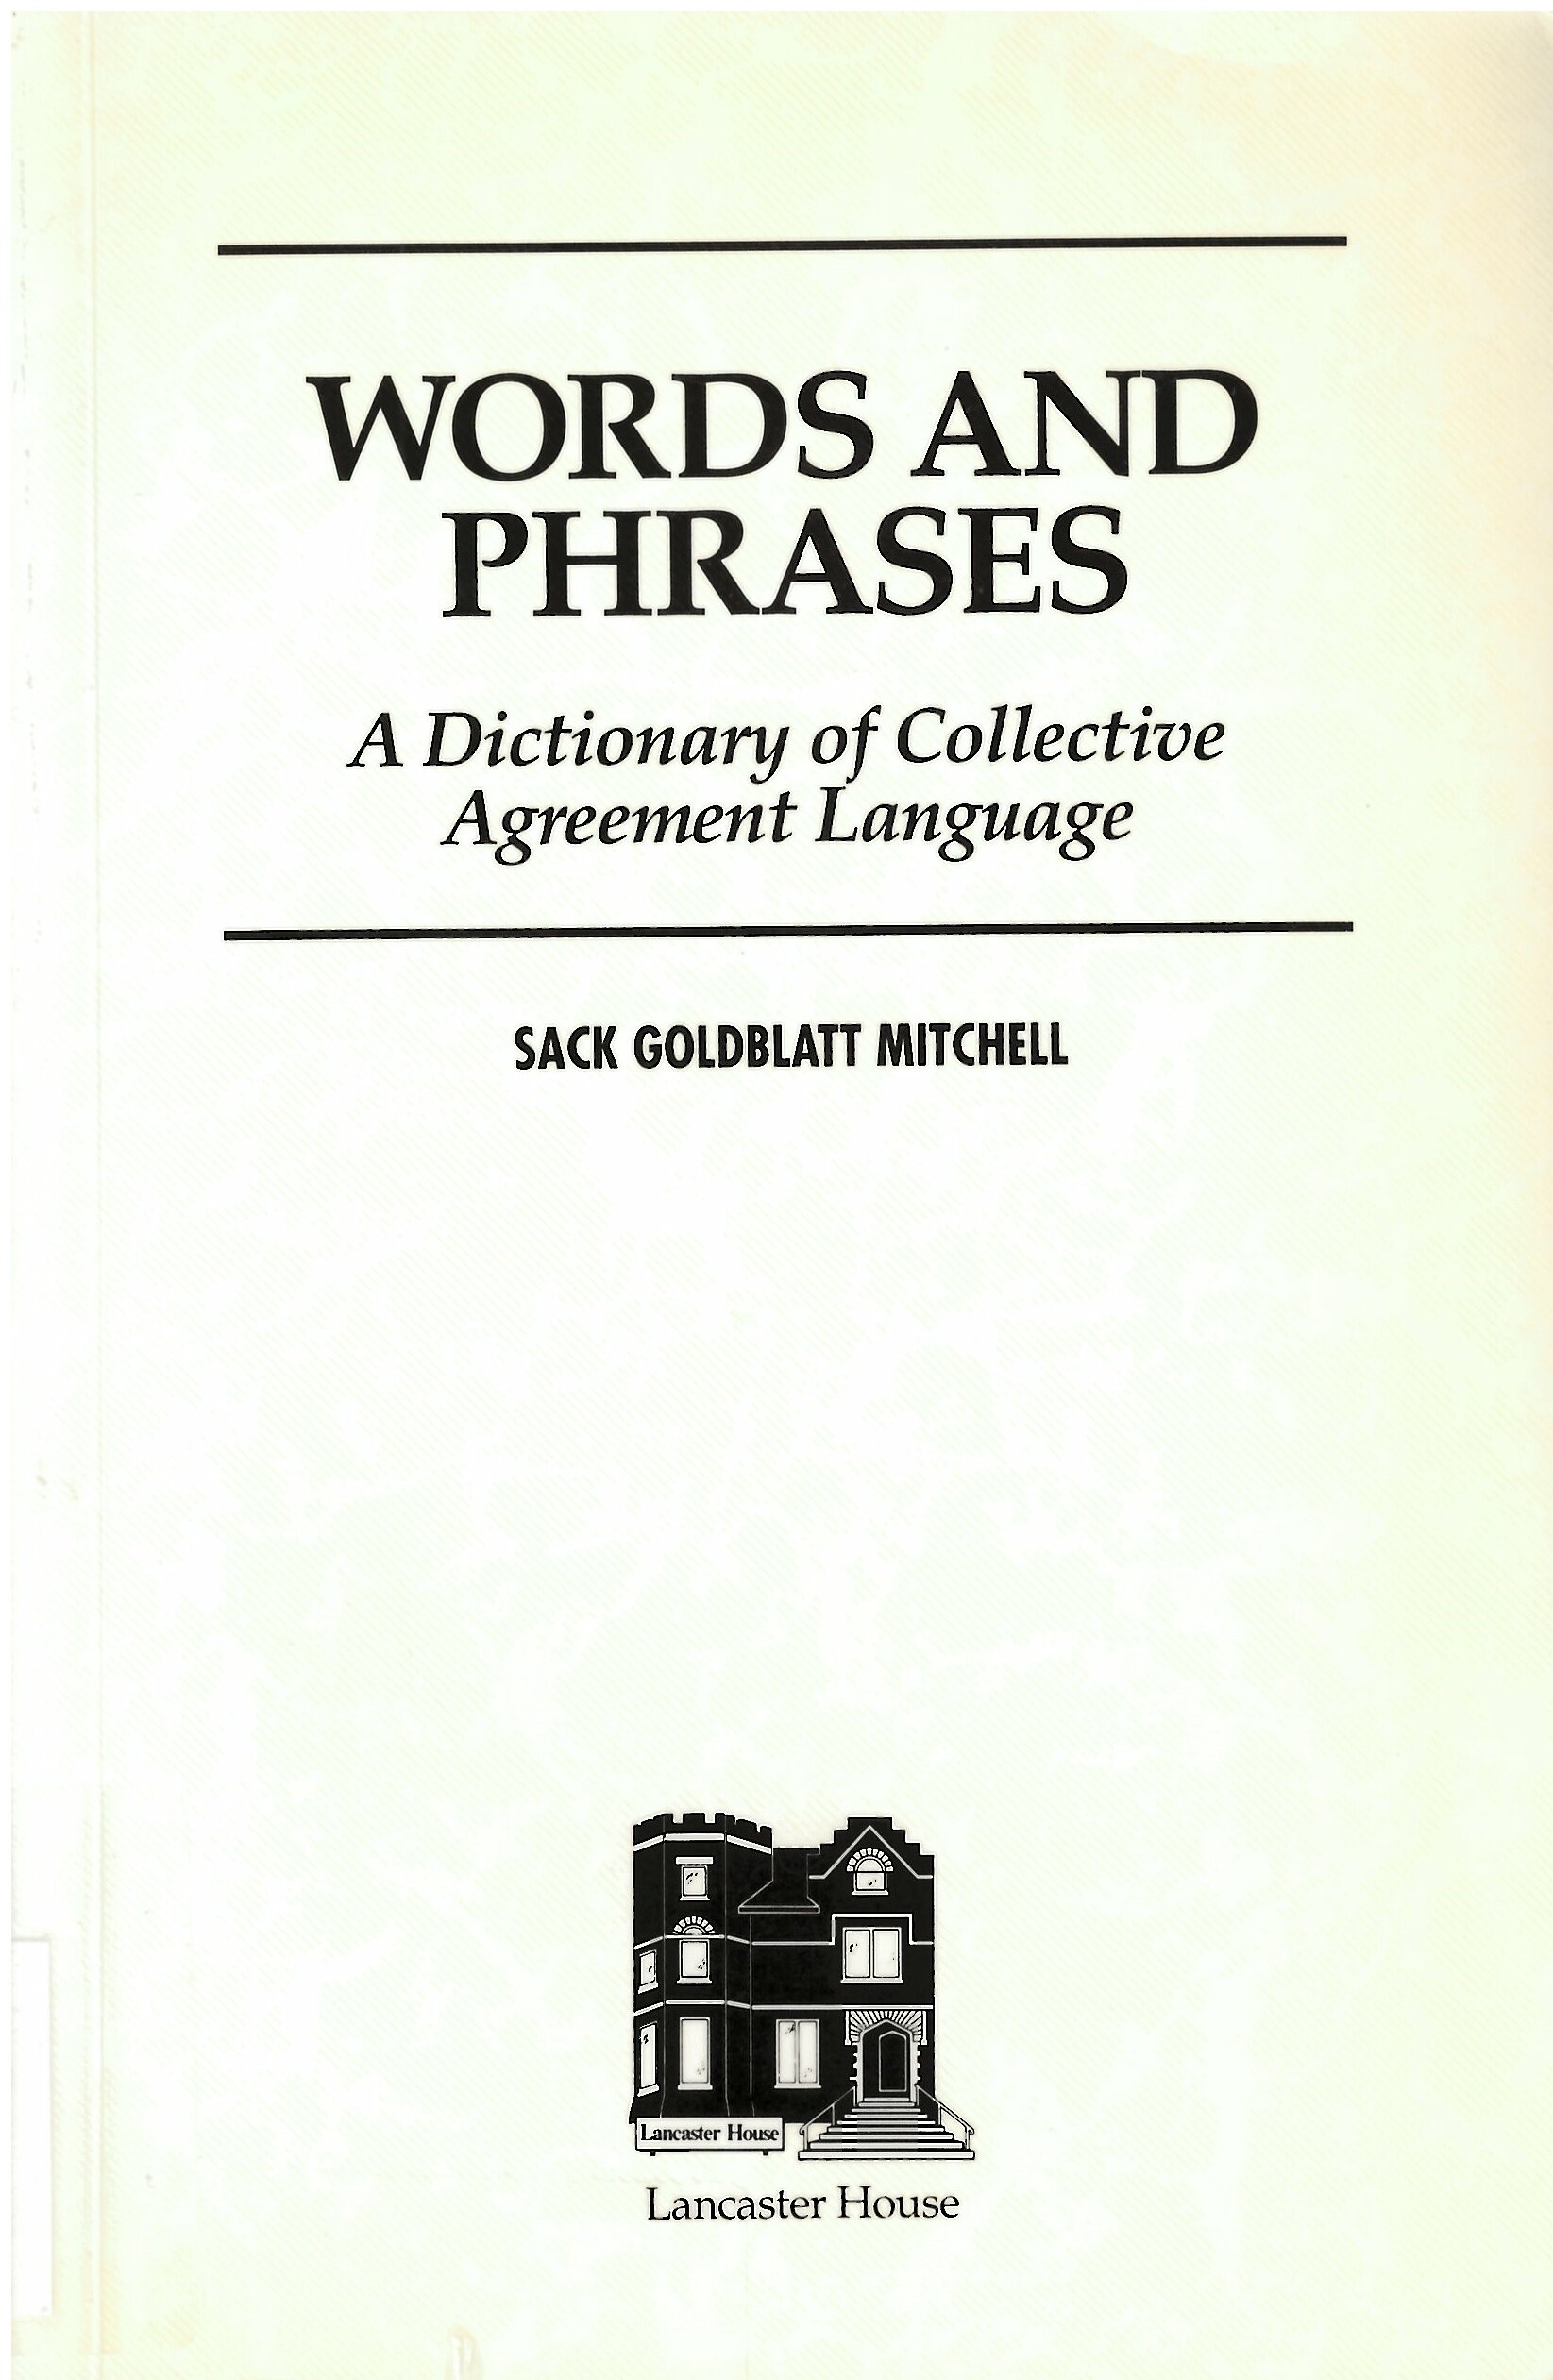 Words and phrases : a dictionary of collective agreement language